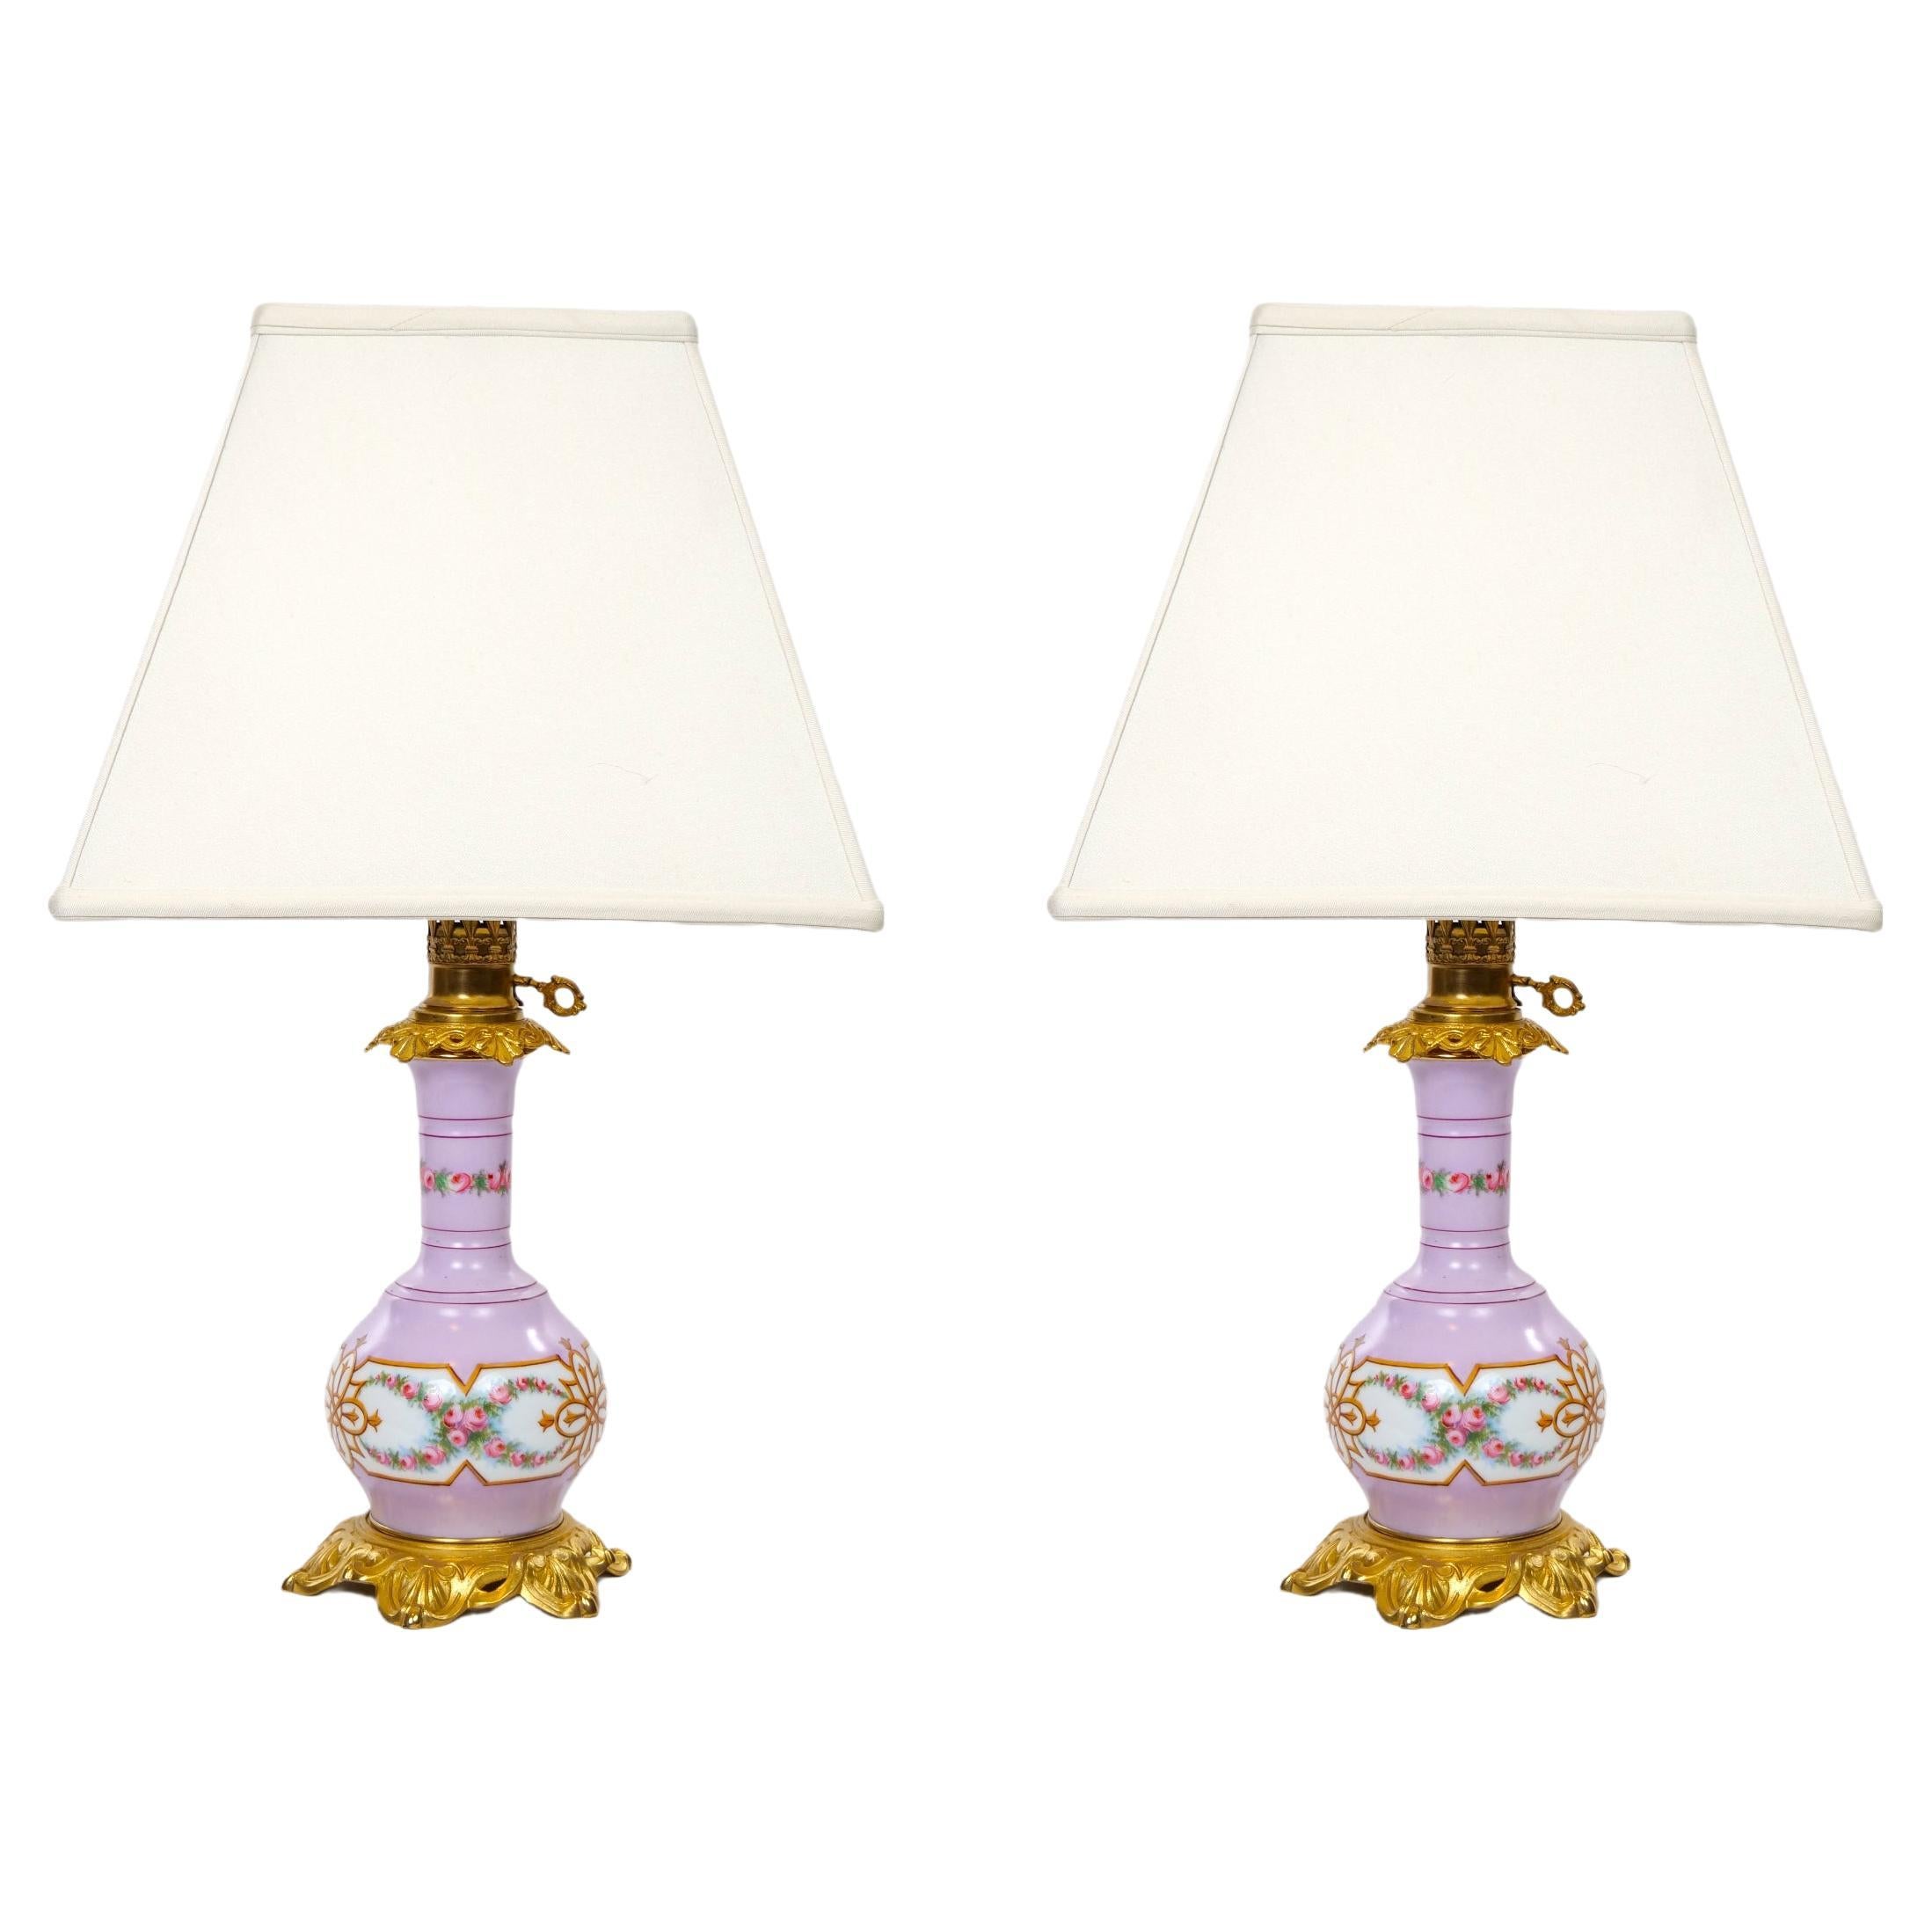 Pair Neoclassical Style Porcelain Lamps / Gilt Bronze Base For Sale